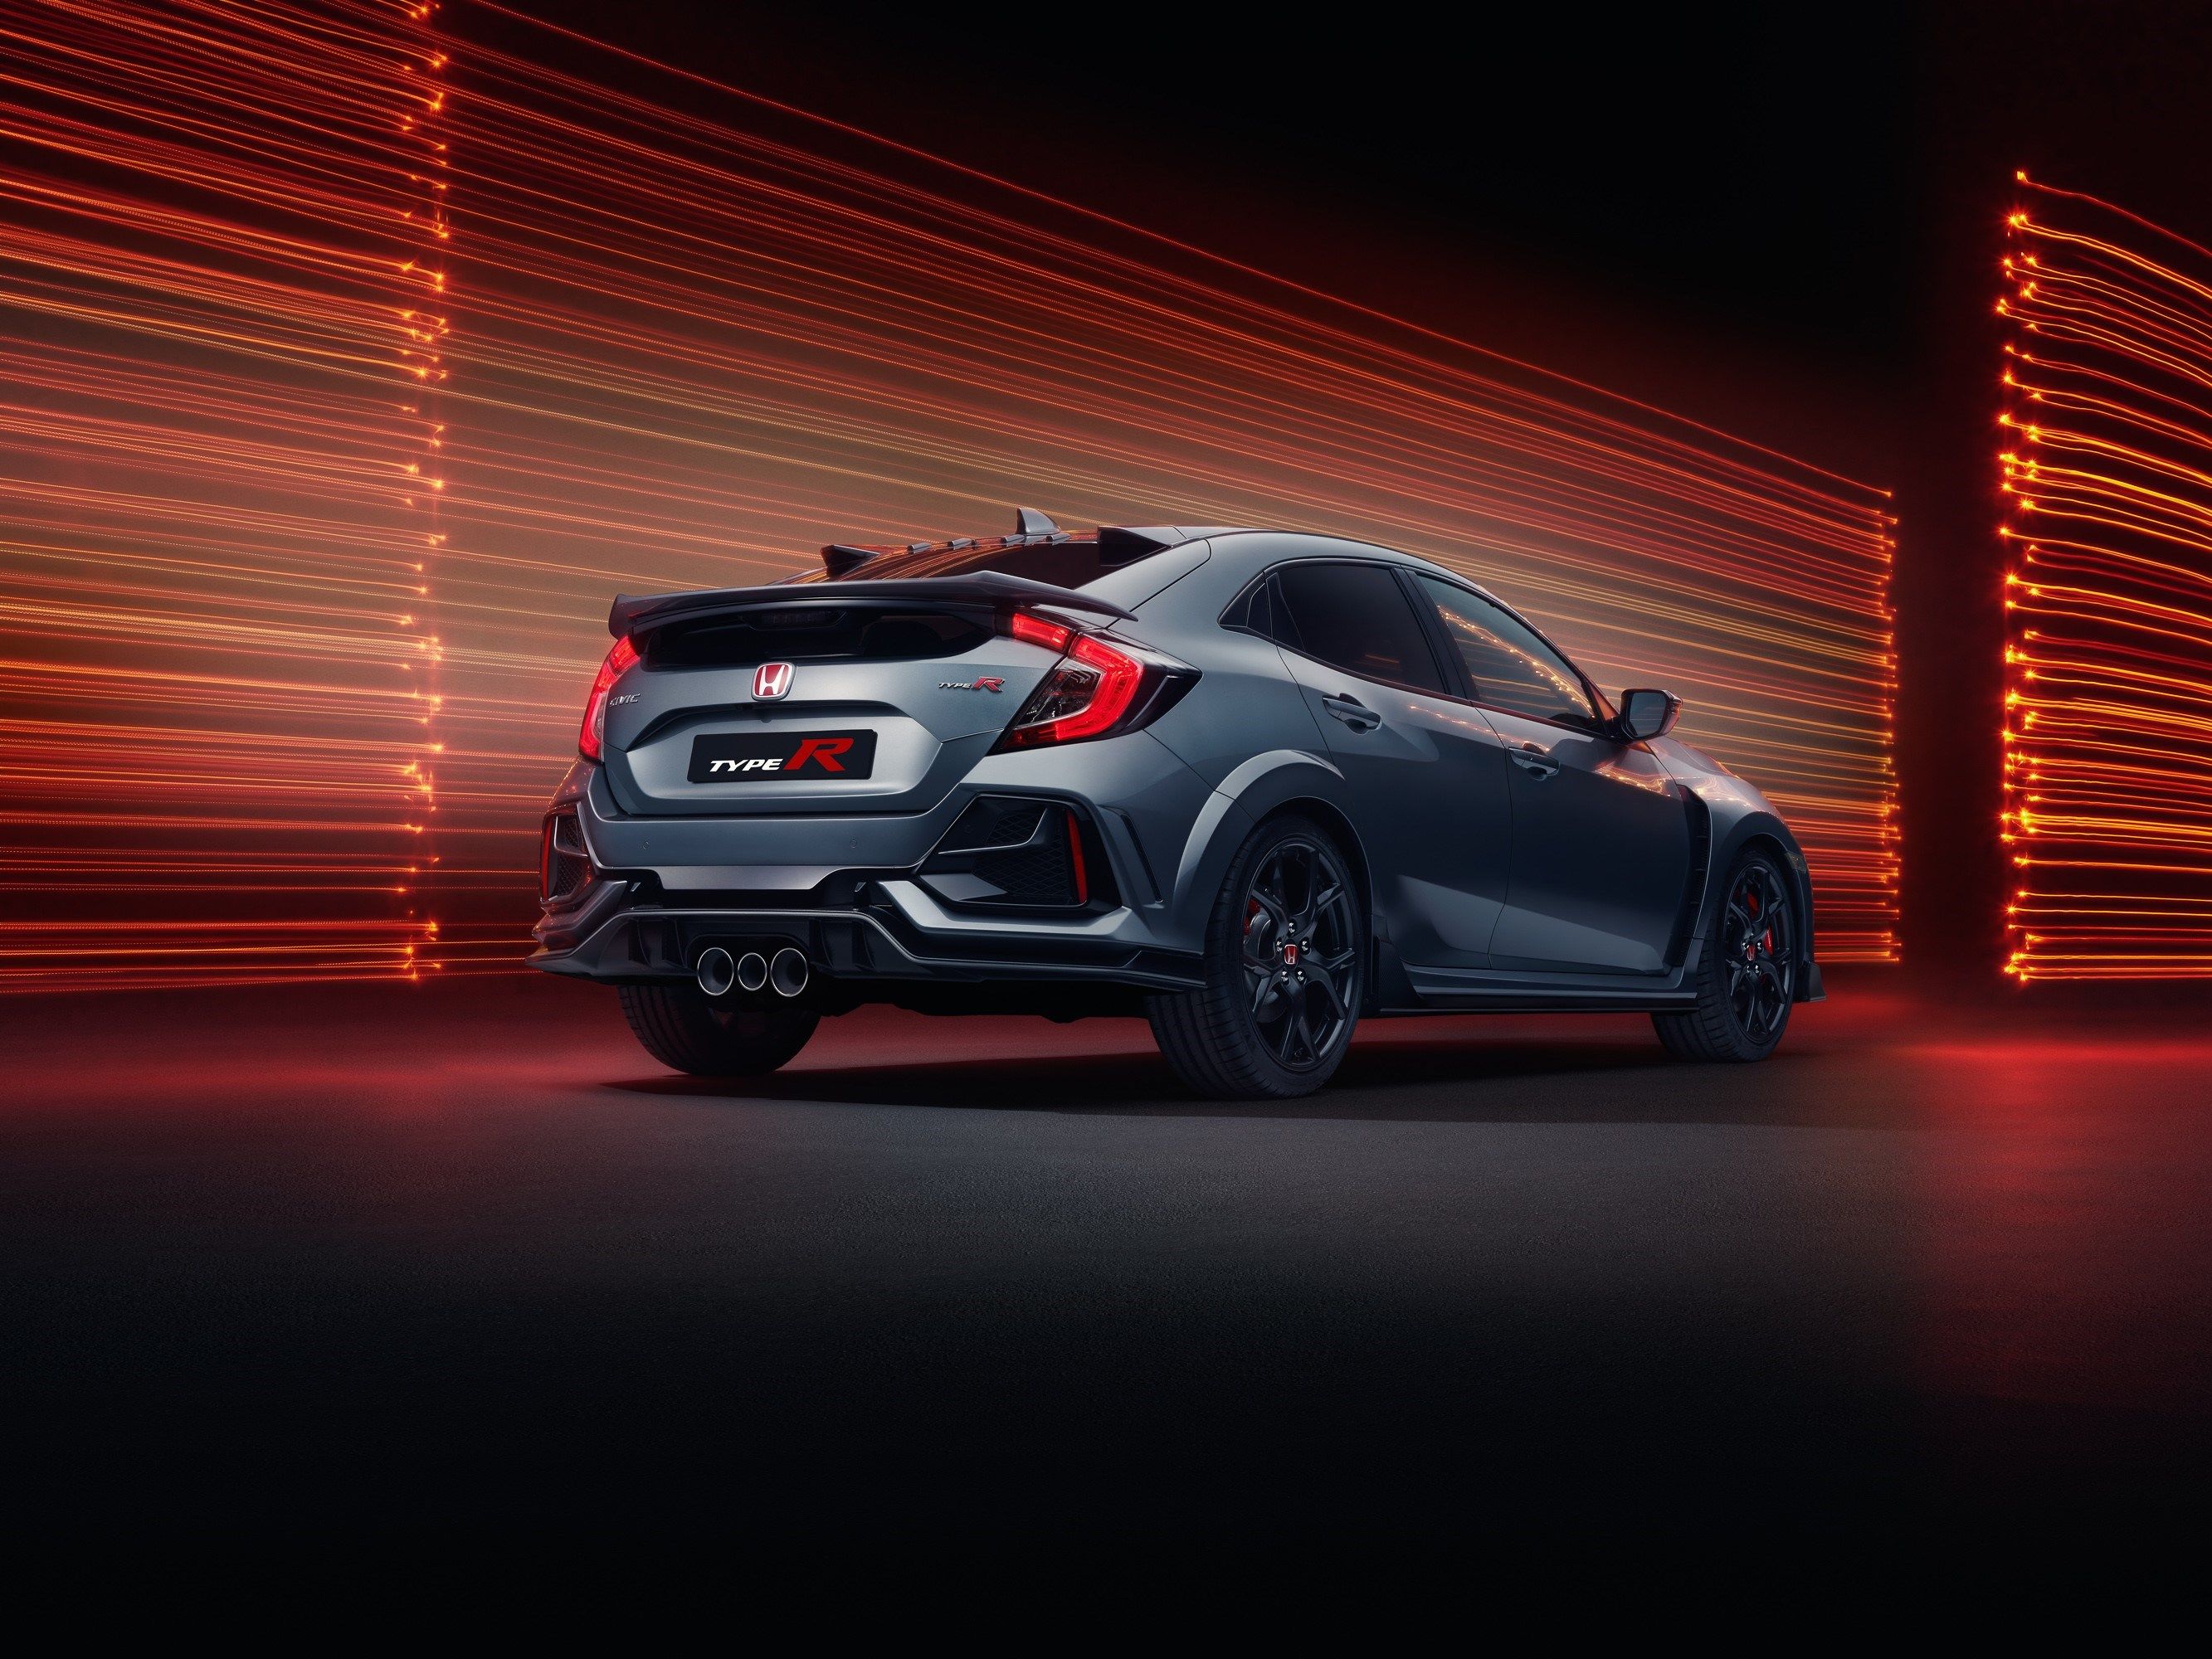 2020 Honda Civic Type R Doesn't Mess With a Good Thing - Review